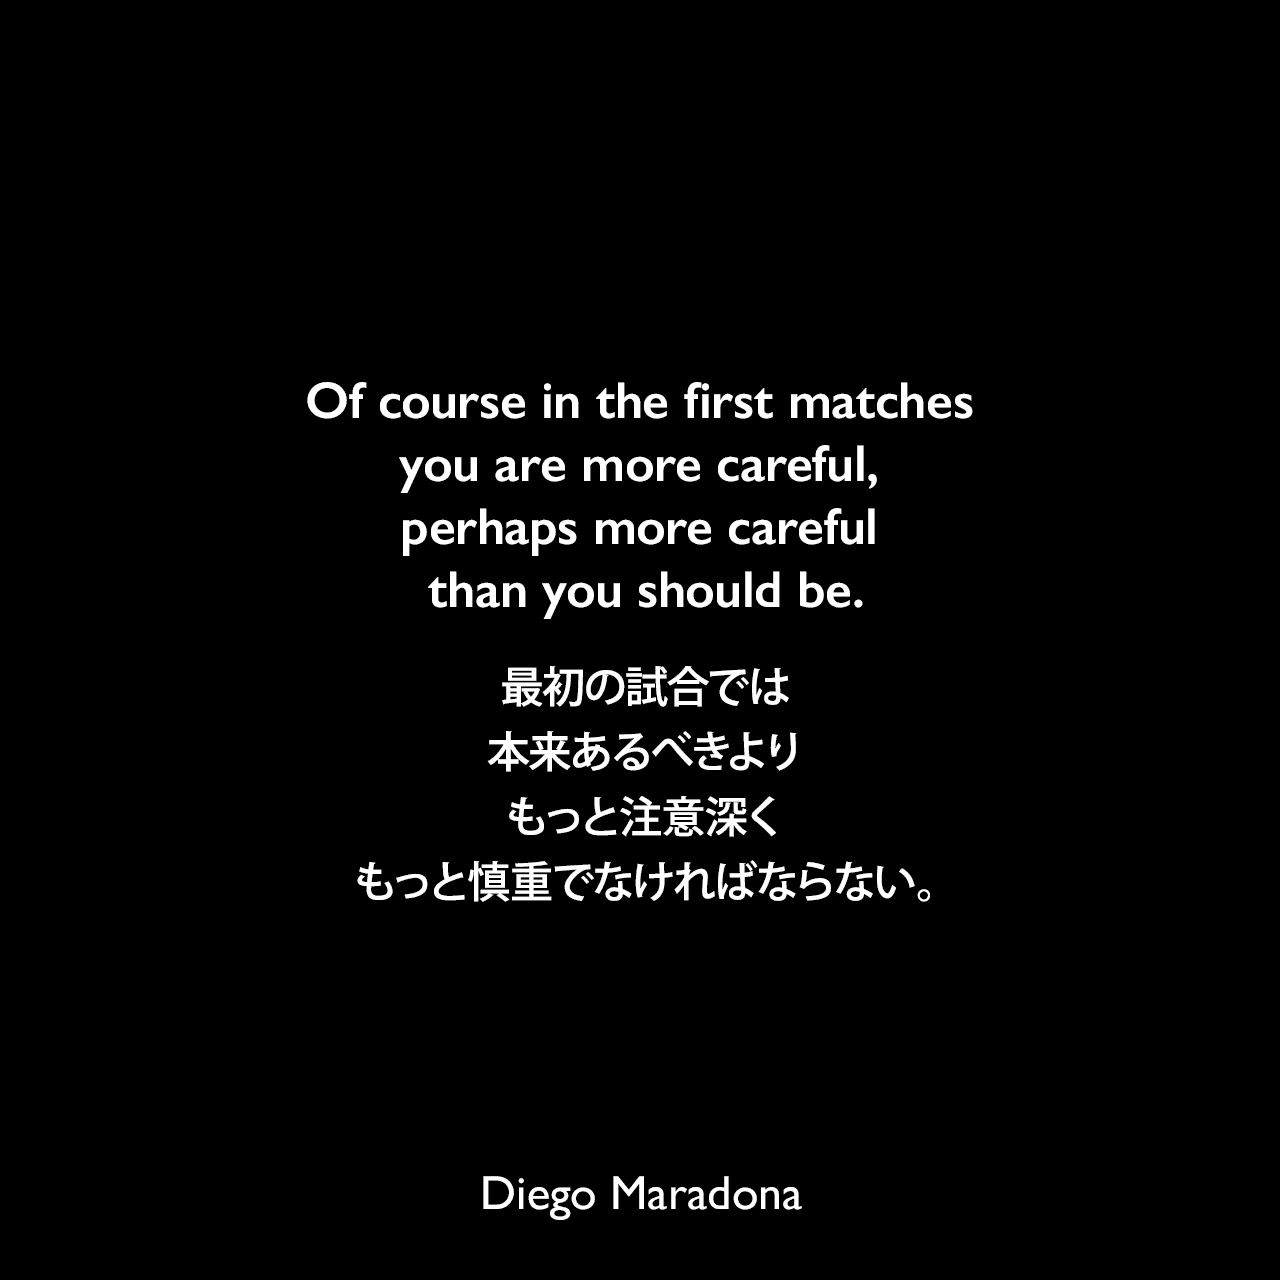 Of course in the first matches you are more careful, perhaps more careful than you should be.最初の試合では、本来あるべきよりもっと注意深くもっと慎重でなければならない。Diego Maradona